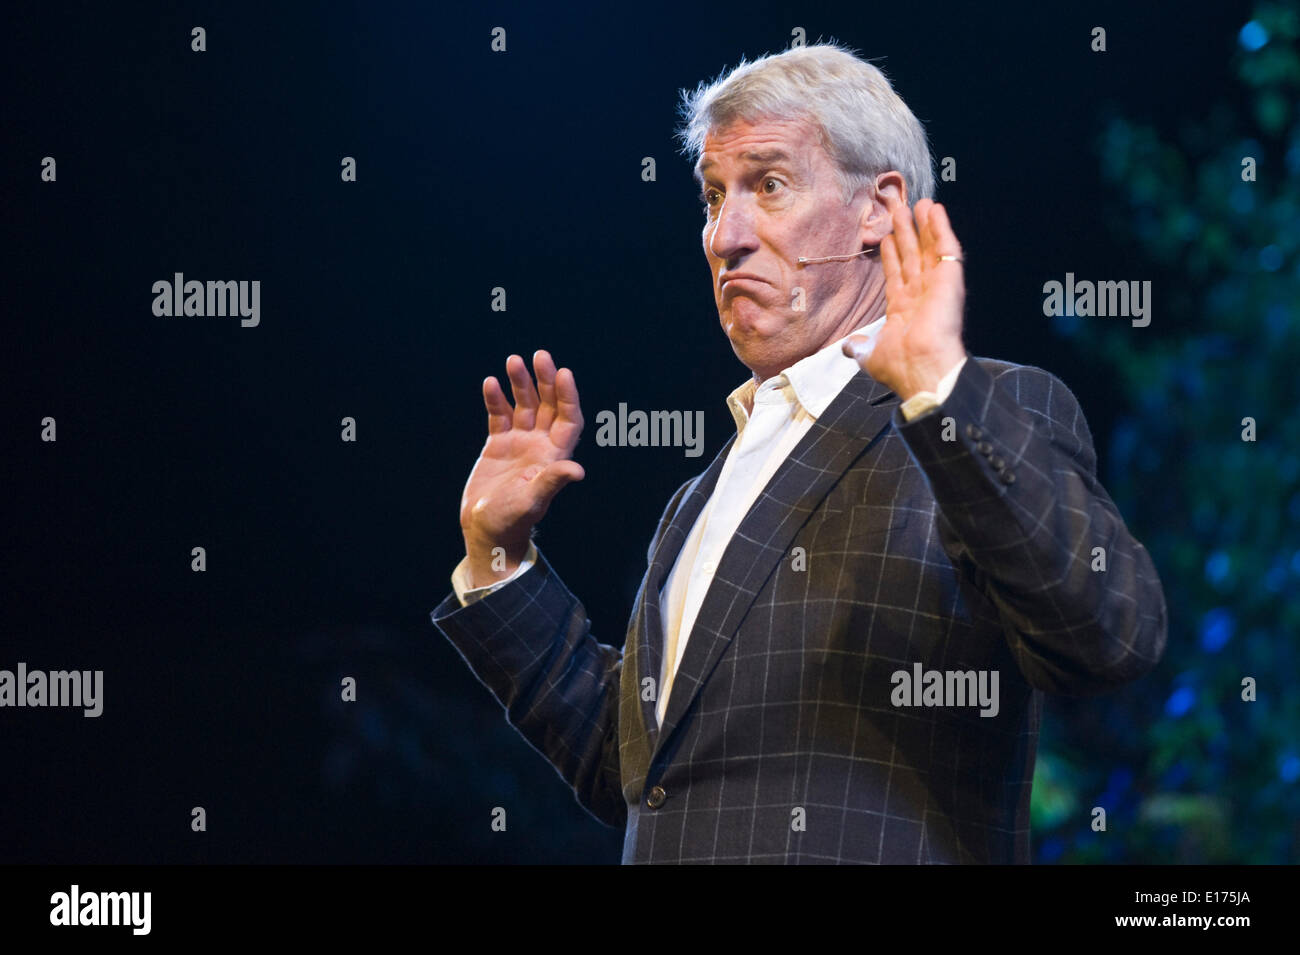 Jeremy Paxman talking about life in Britain during WWI on stage at Hay Festival 2014  ©Jeff Morgan Stock Photo